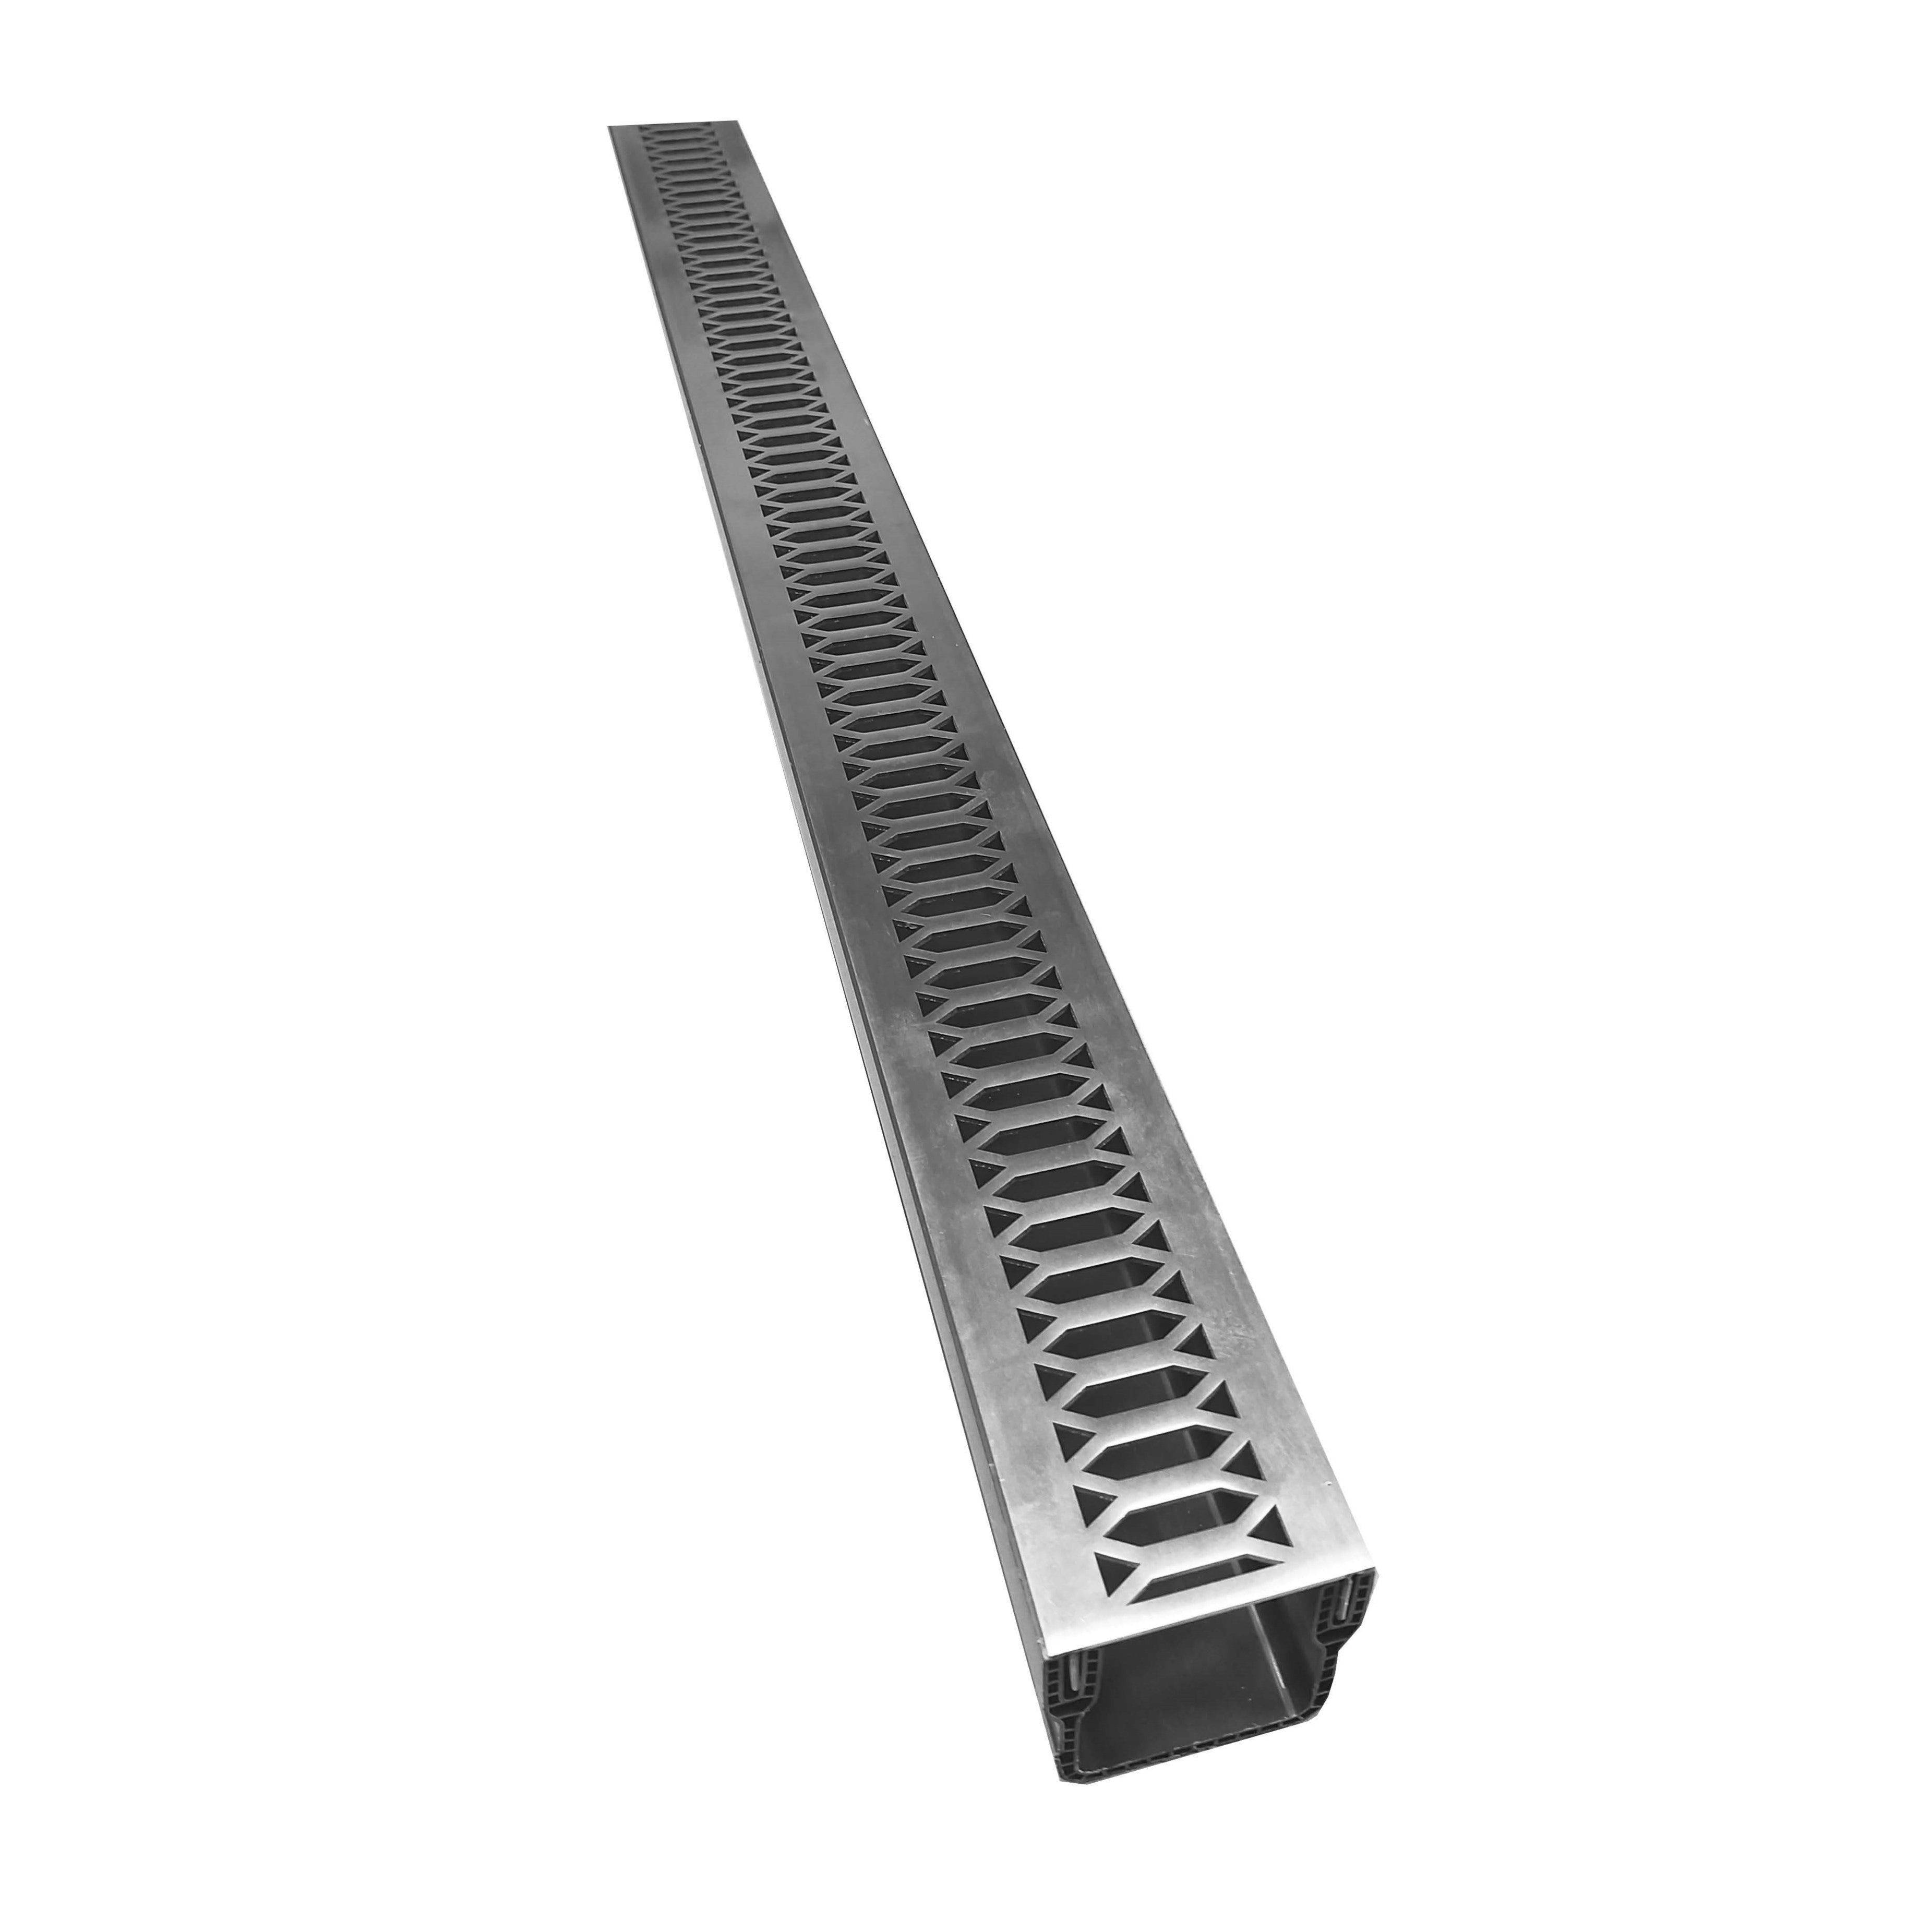 1m Threshold Slim Drain with Hexagon 316 Stainless Steel Grating (65 x 60mm Shallow)